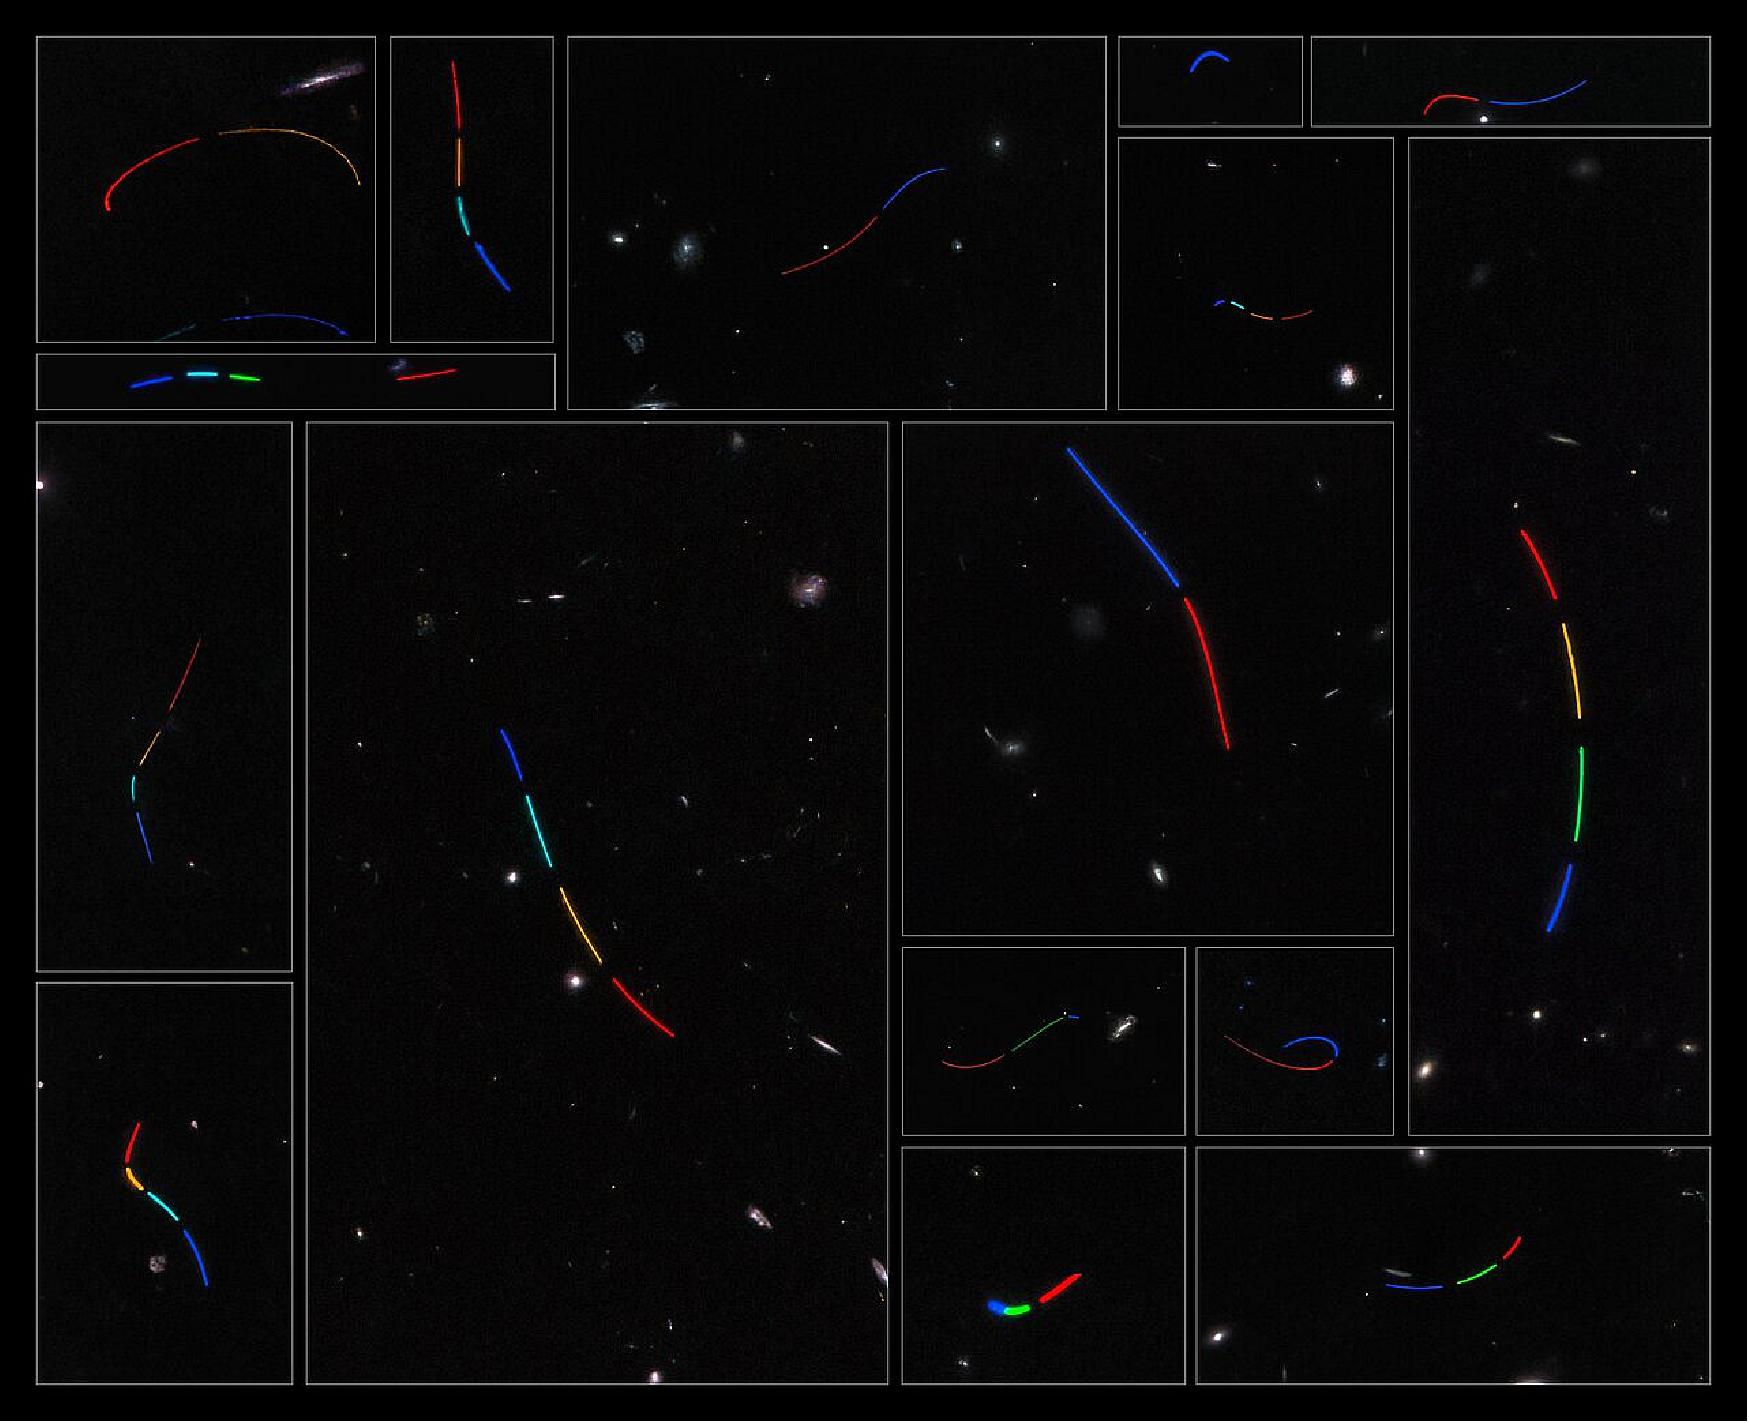 Figure 45: This mosaic consists of 16 different data sets from the NASA/ESA Hubble Space Telescope that were studied as part of the Asteroid Hunter citizen science project. Each of these datasets was assigned a colour based on the time sequence of exposures, such that the blue tones represent the first exposure in which the asteroid was captured and the red tones represent the last [image credit: ESA/Hubble & NASA, S. Kruk (ESA/ESTEC), Hubble Asteroid Hunter citizen science team, M. Zamani (ESA/Hubble)]